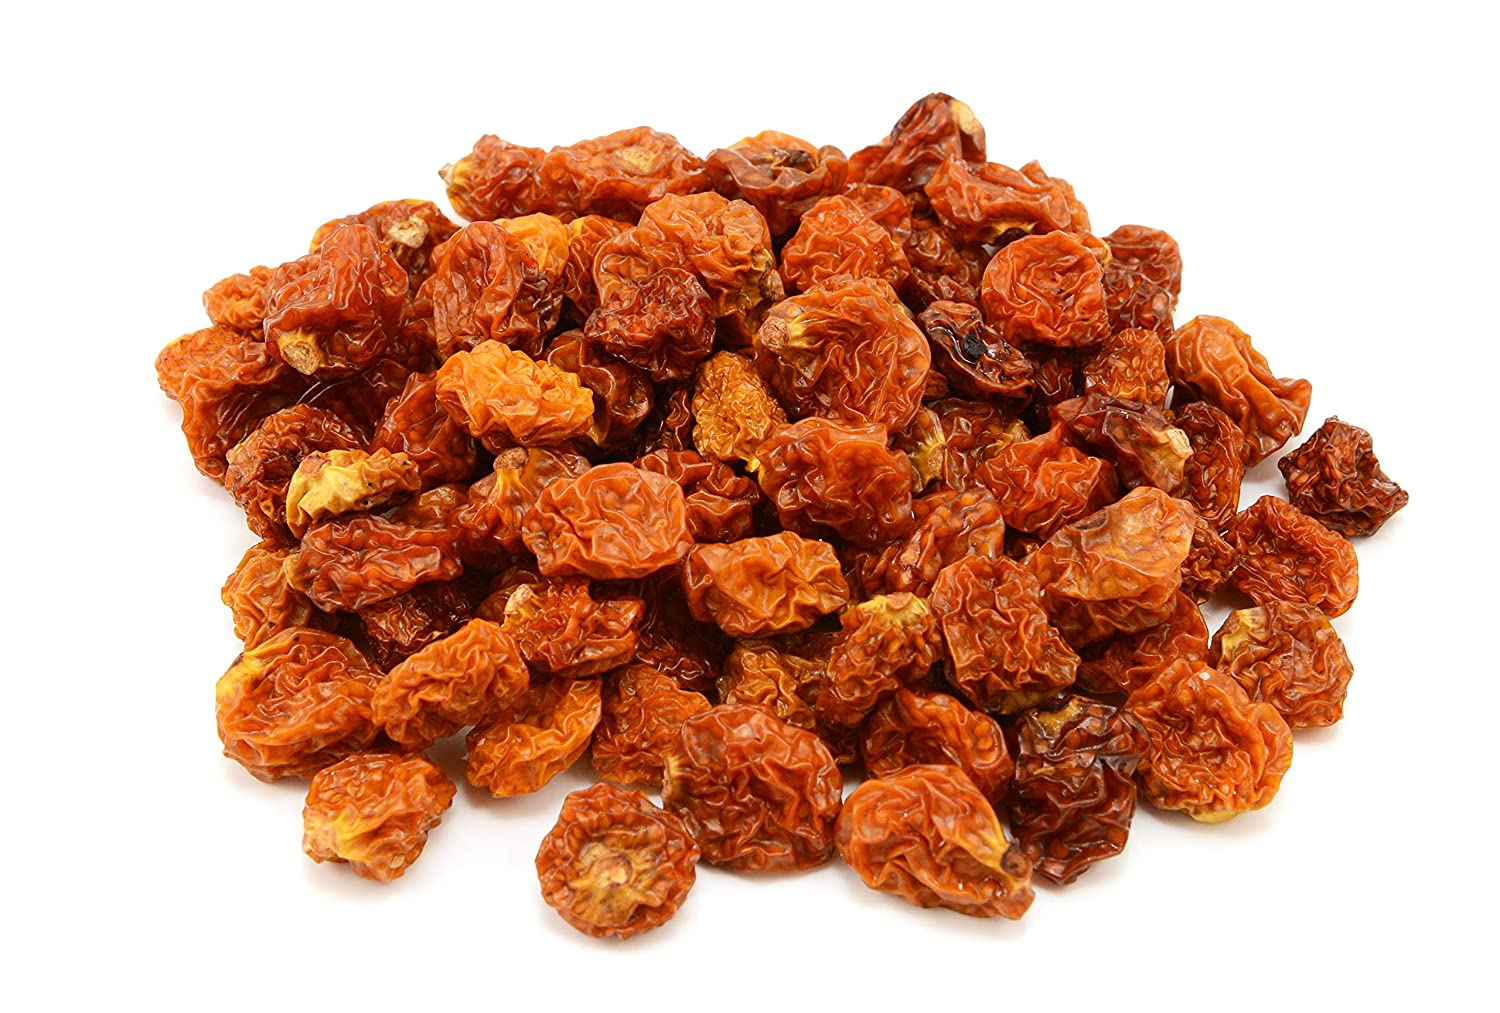 Anna and Sarah Organic Dried Golden Berries, 4.5 Lbs - 0